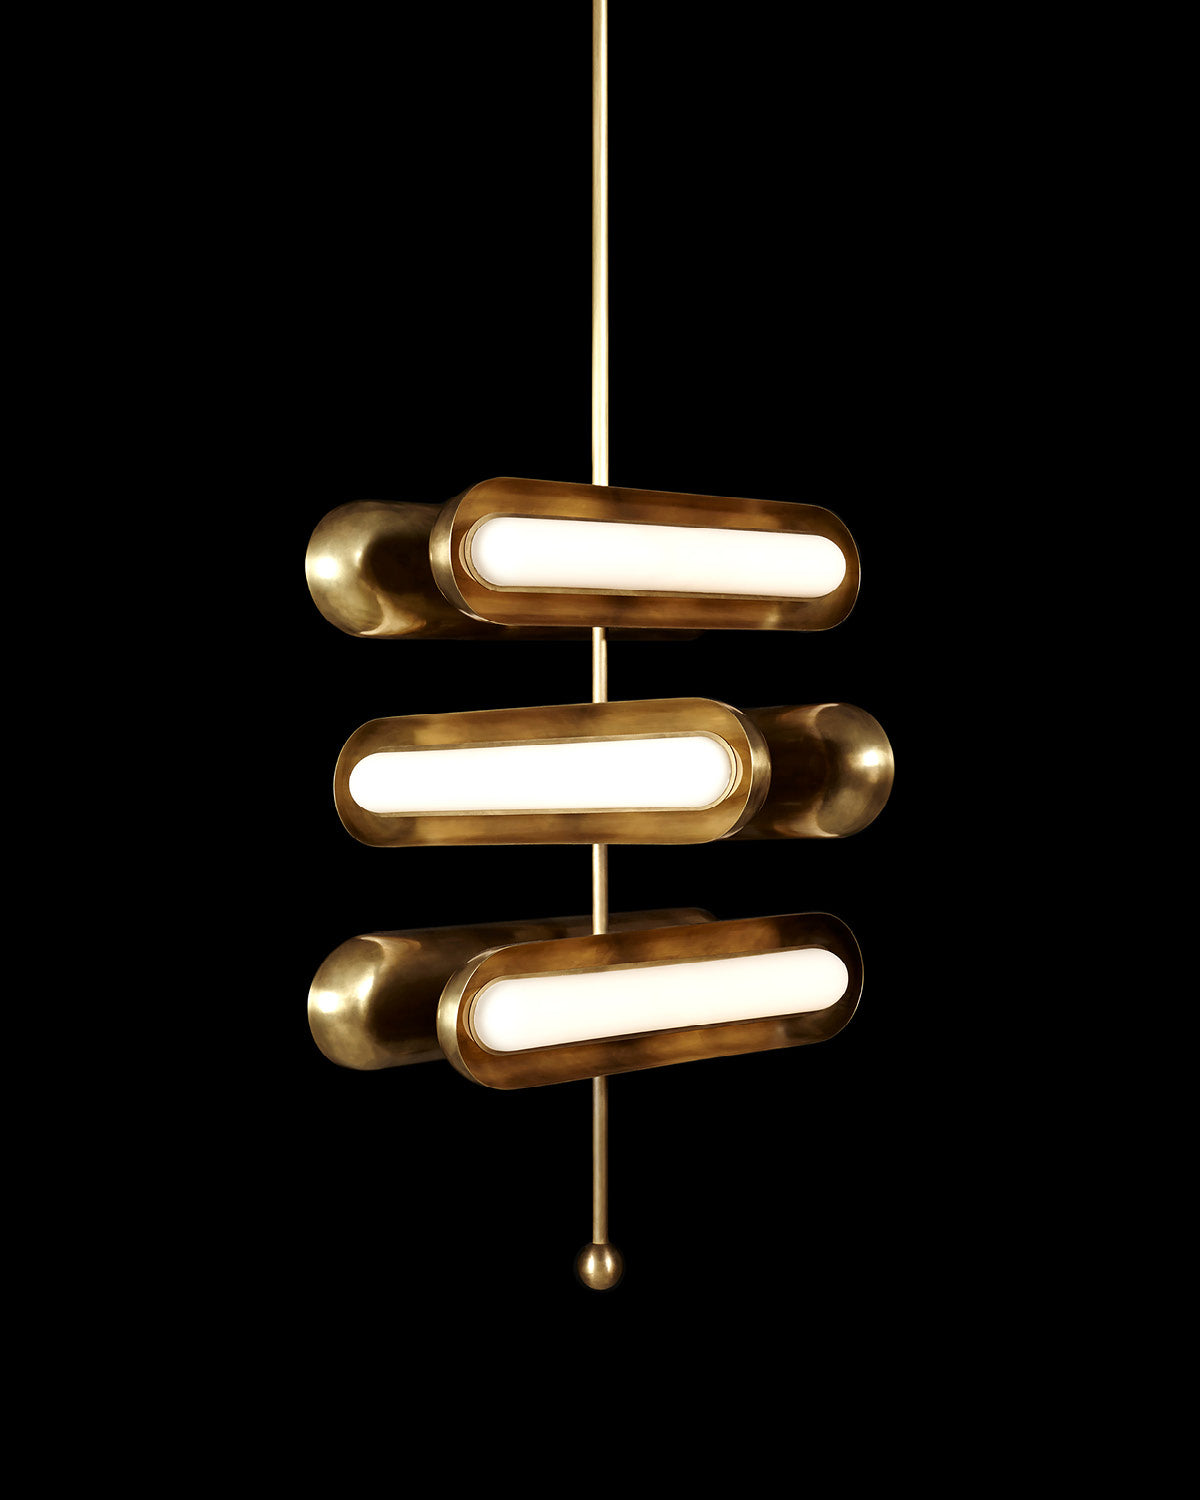 CIRCUIT : 6 ceiling pendant in Aged Brass finish, hanging against a black background. 